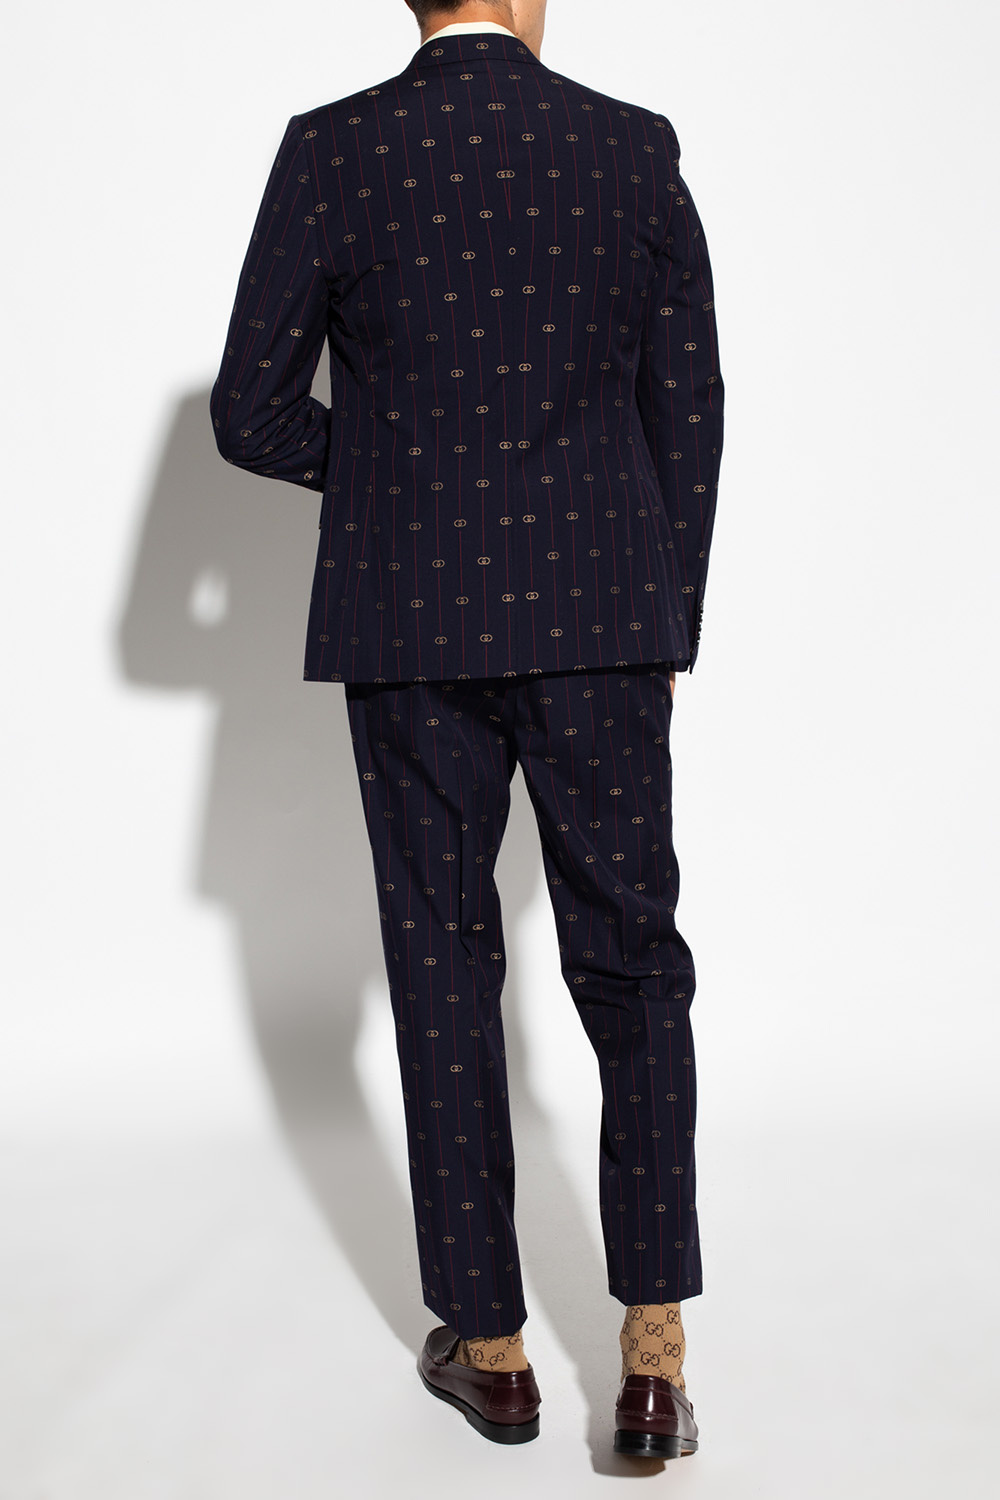 Gucci Releases GG Monogrammed Pattern Suit – PAUSE Online